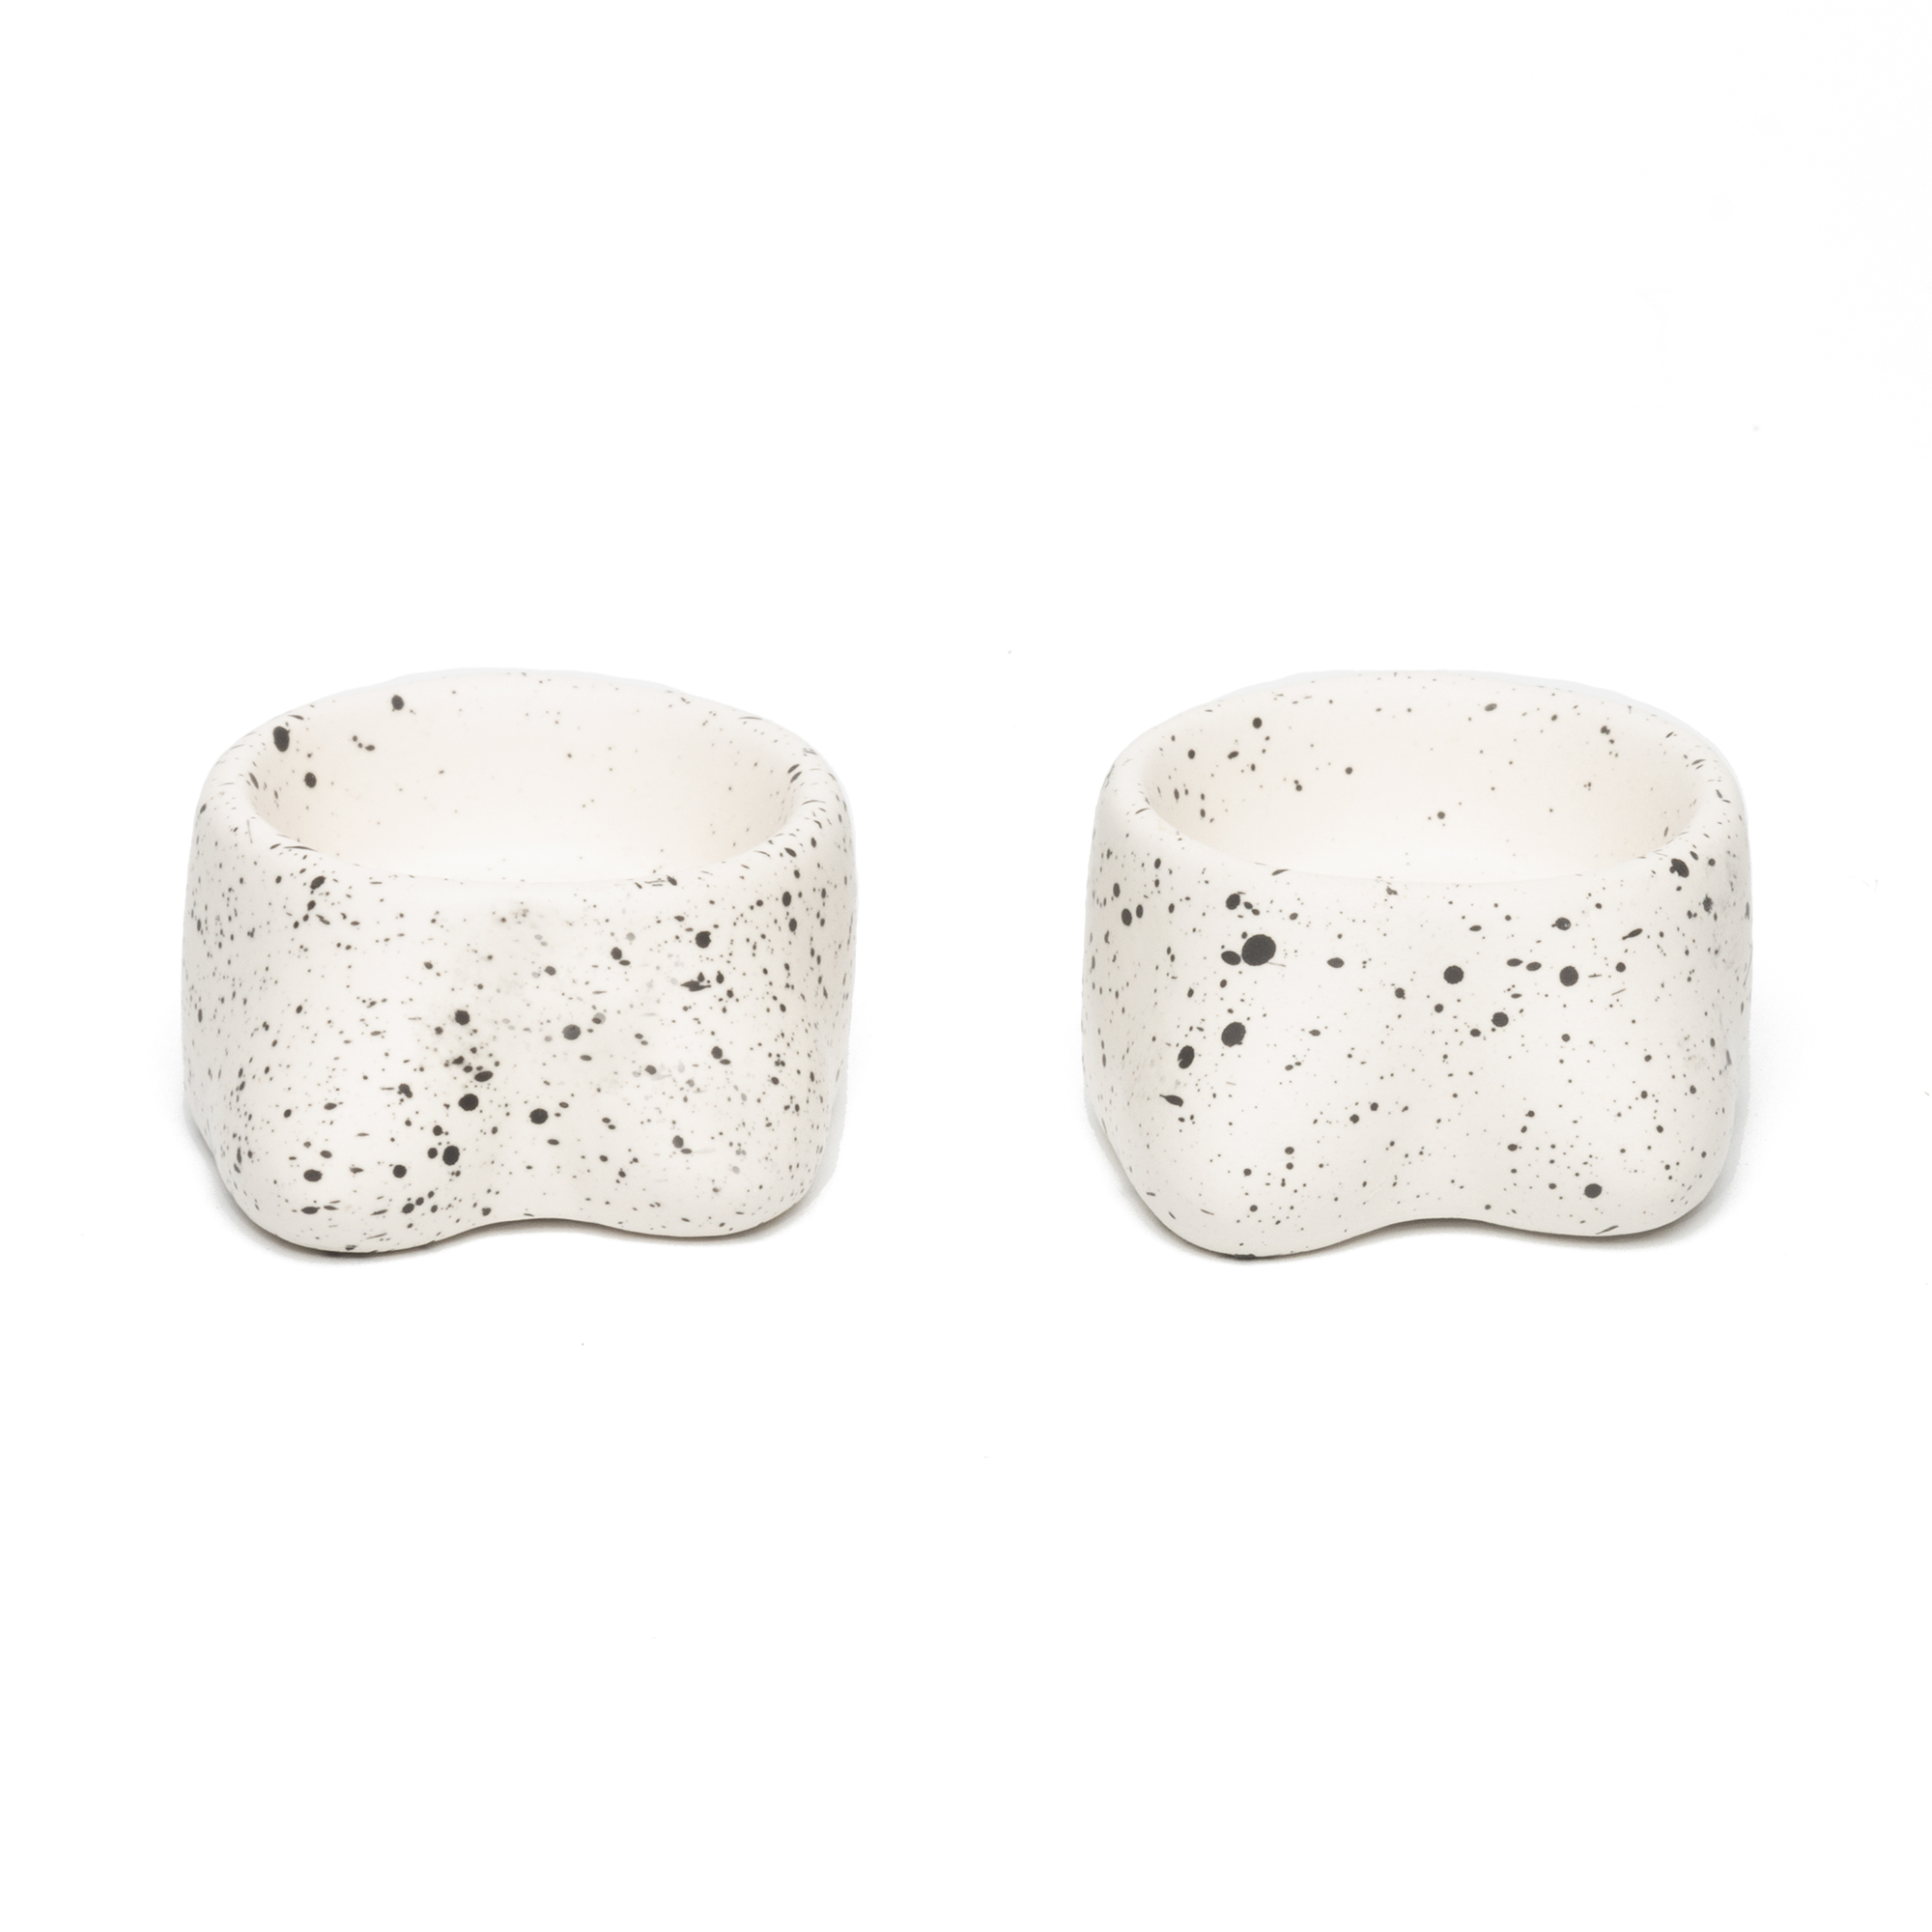 PACK OF 2 TITS CANDLE HOLDERS WHITE SMALL SIZE HF